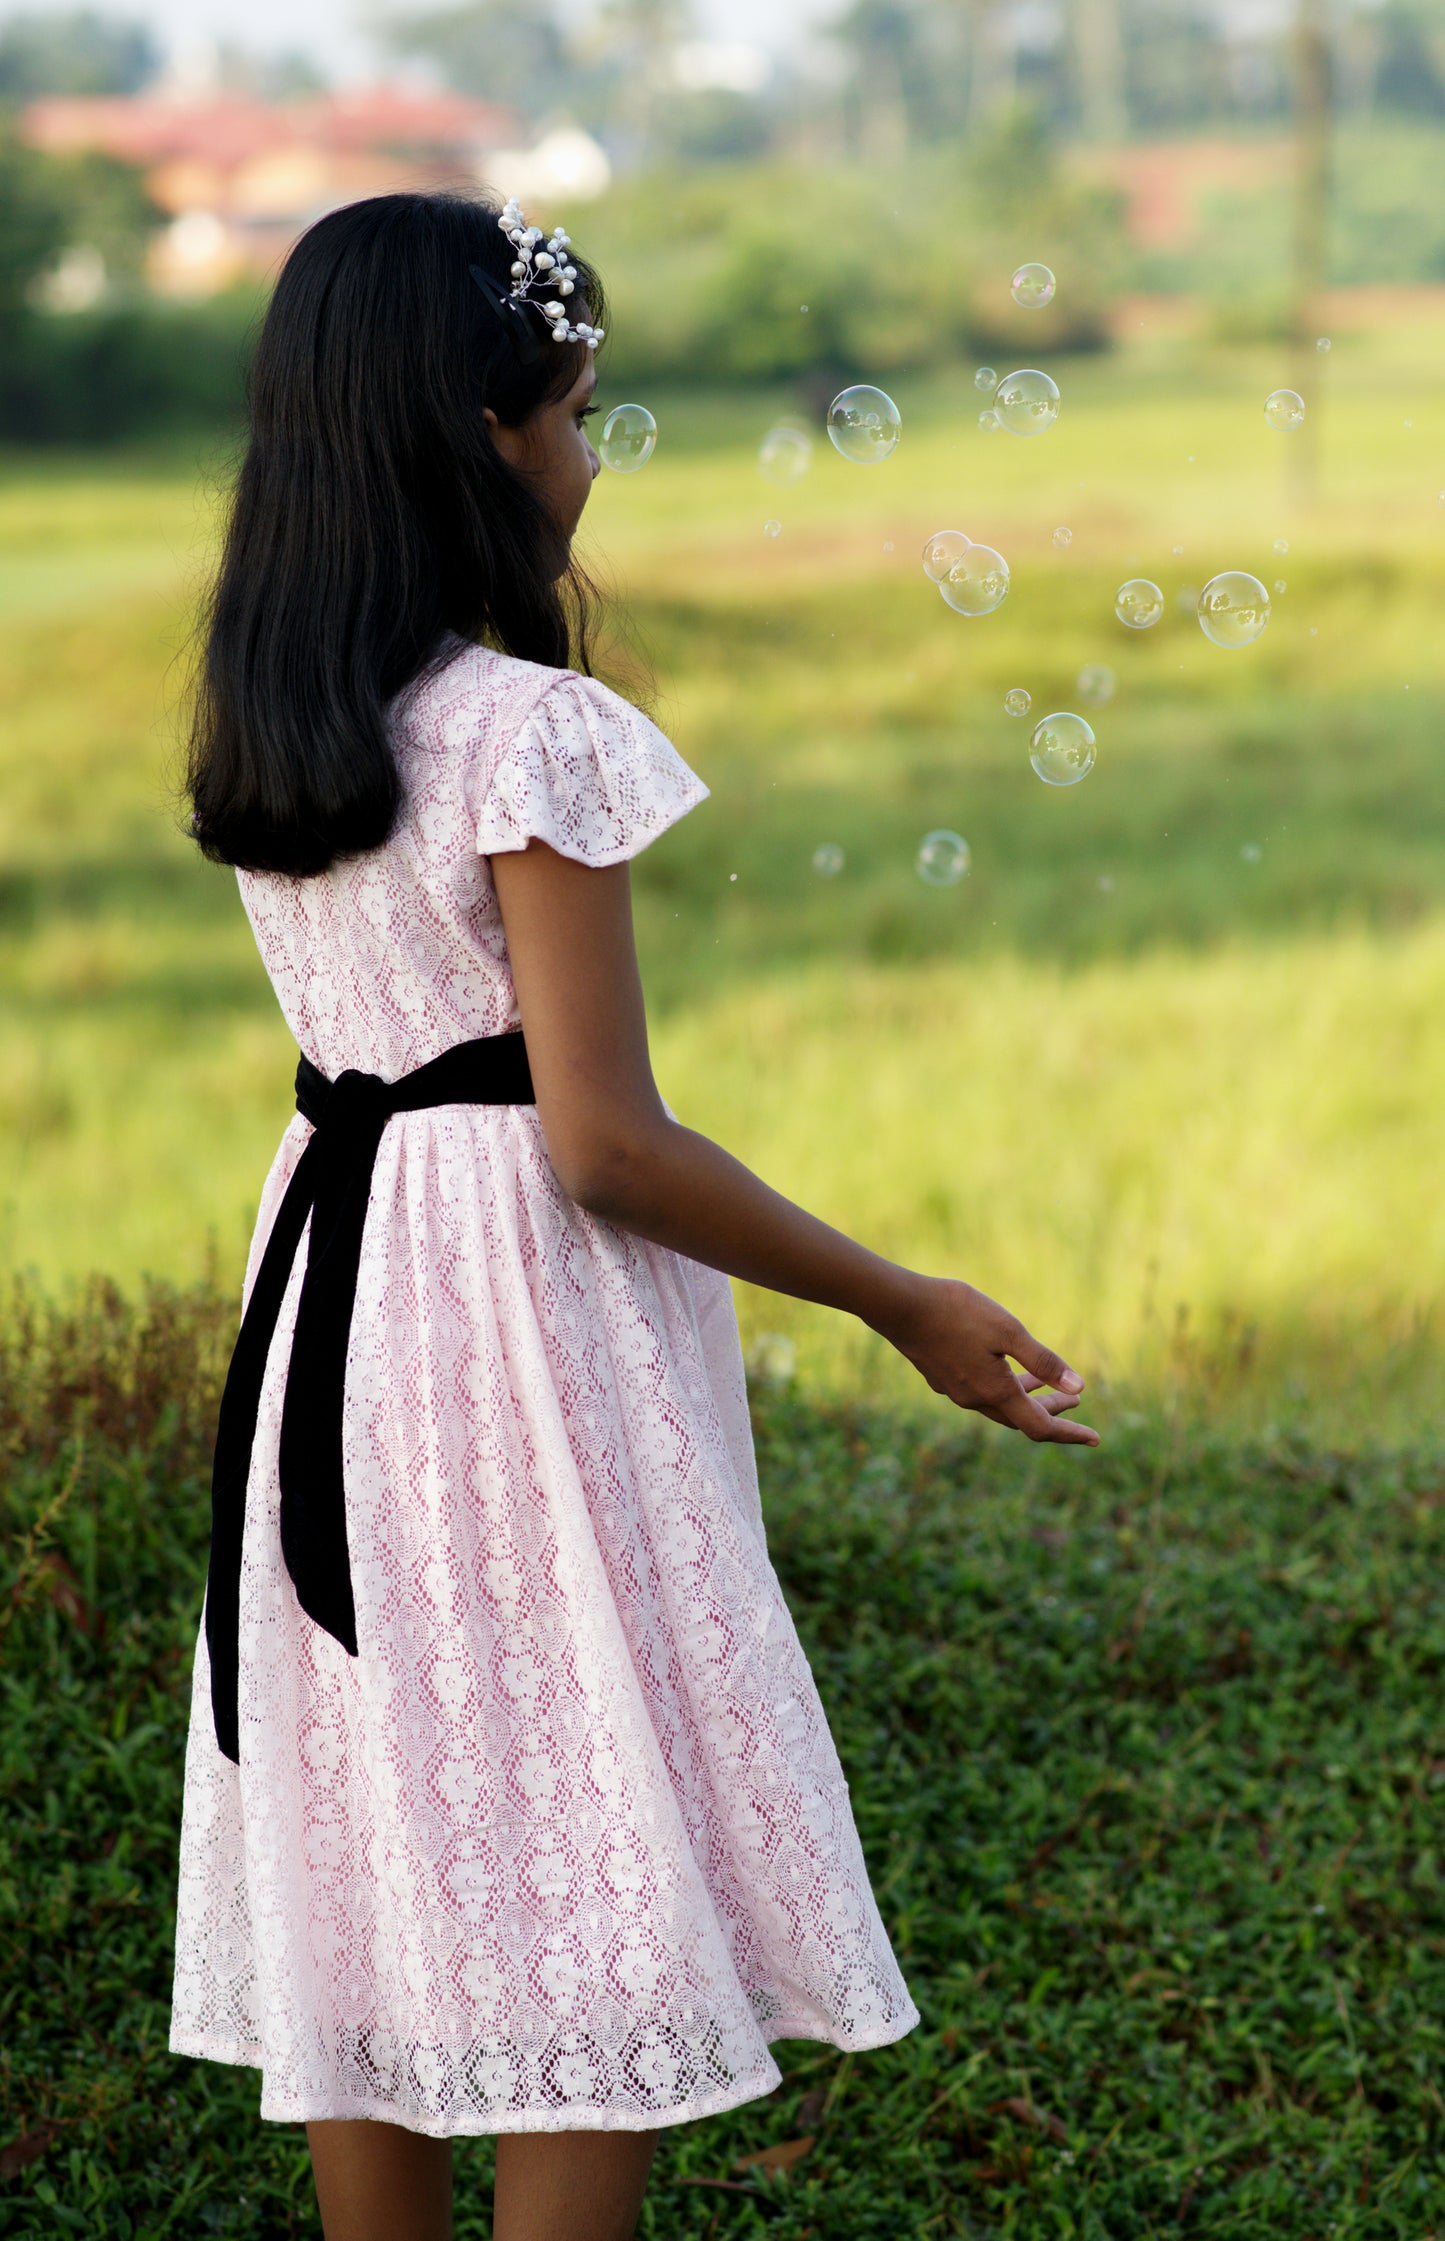 Kids lace frock in baby pink shade